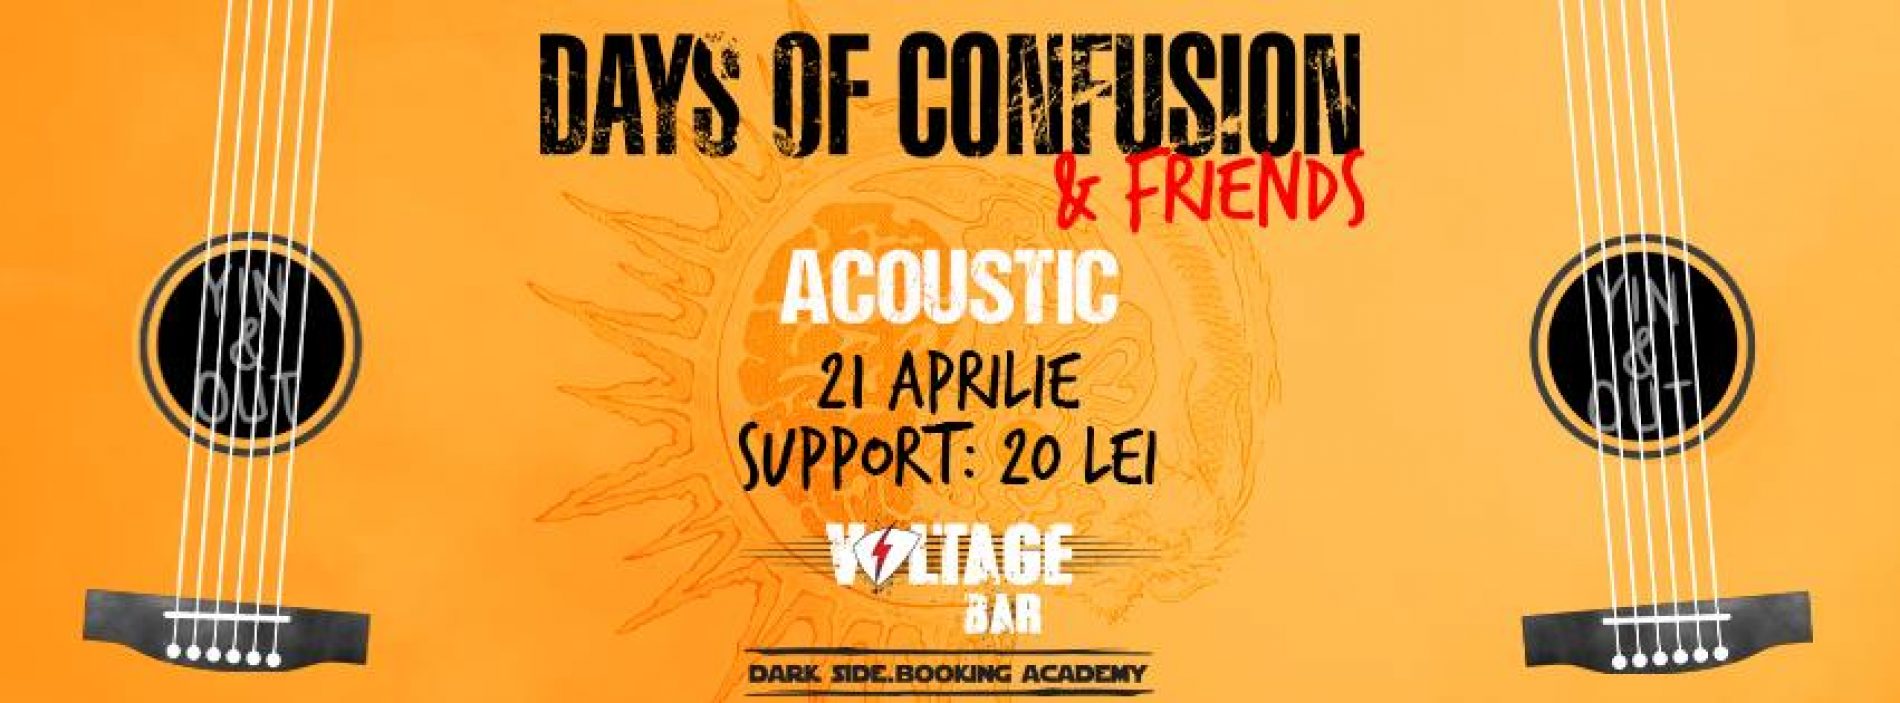 Cronica: Days of Confusion concert acustic @ Voltage